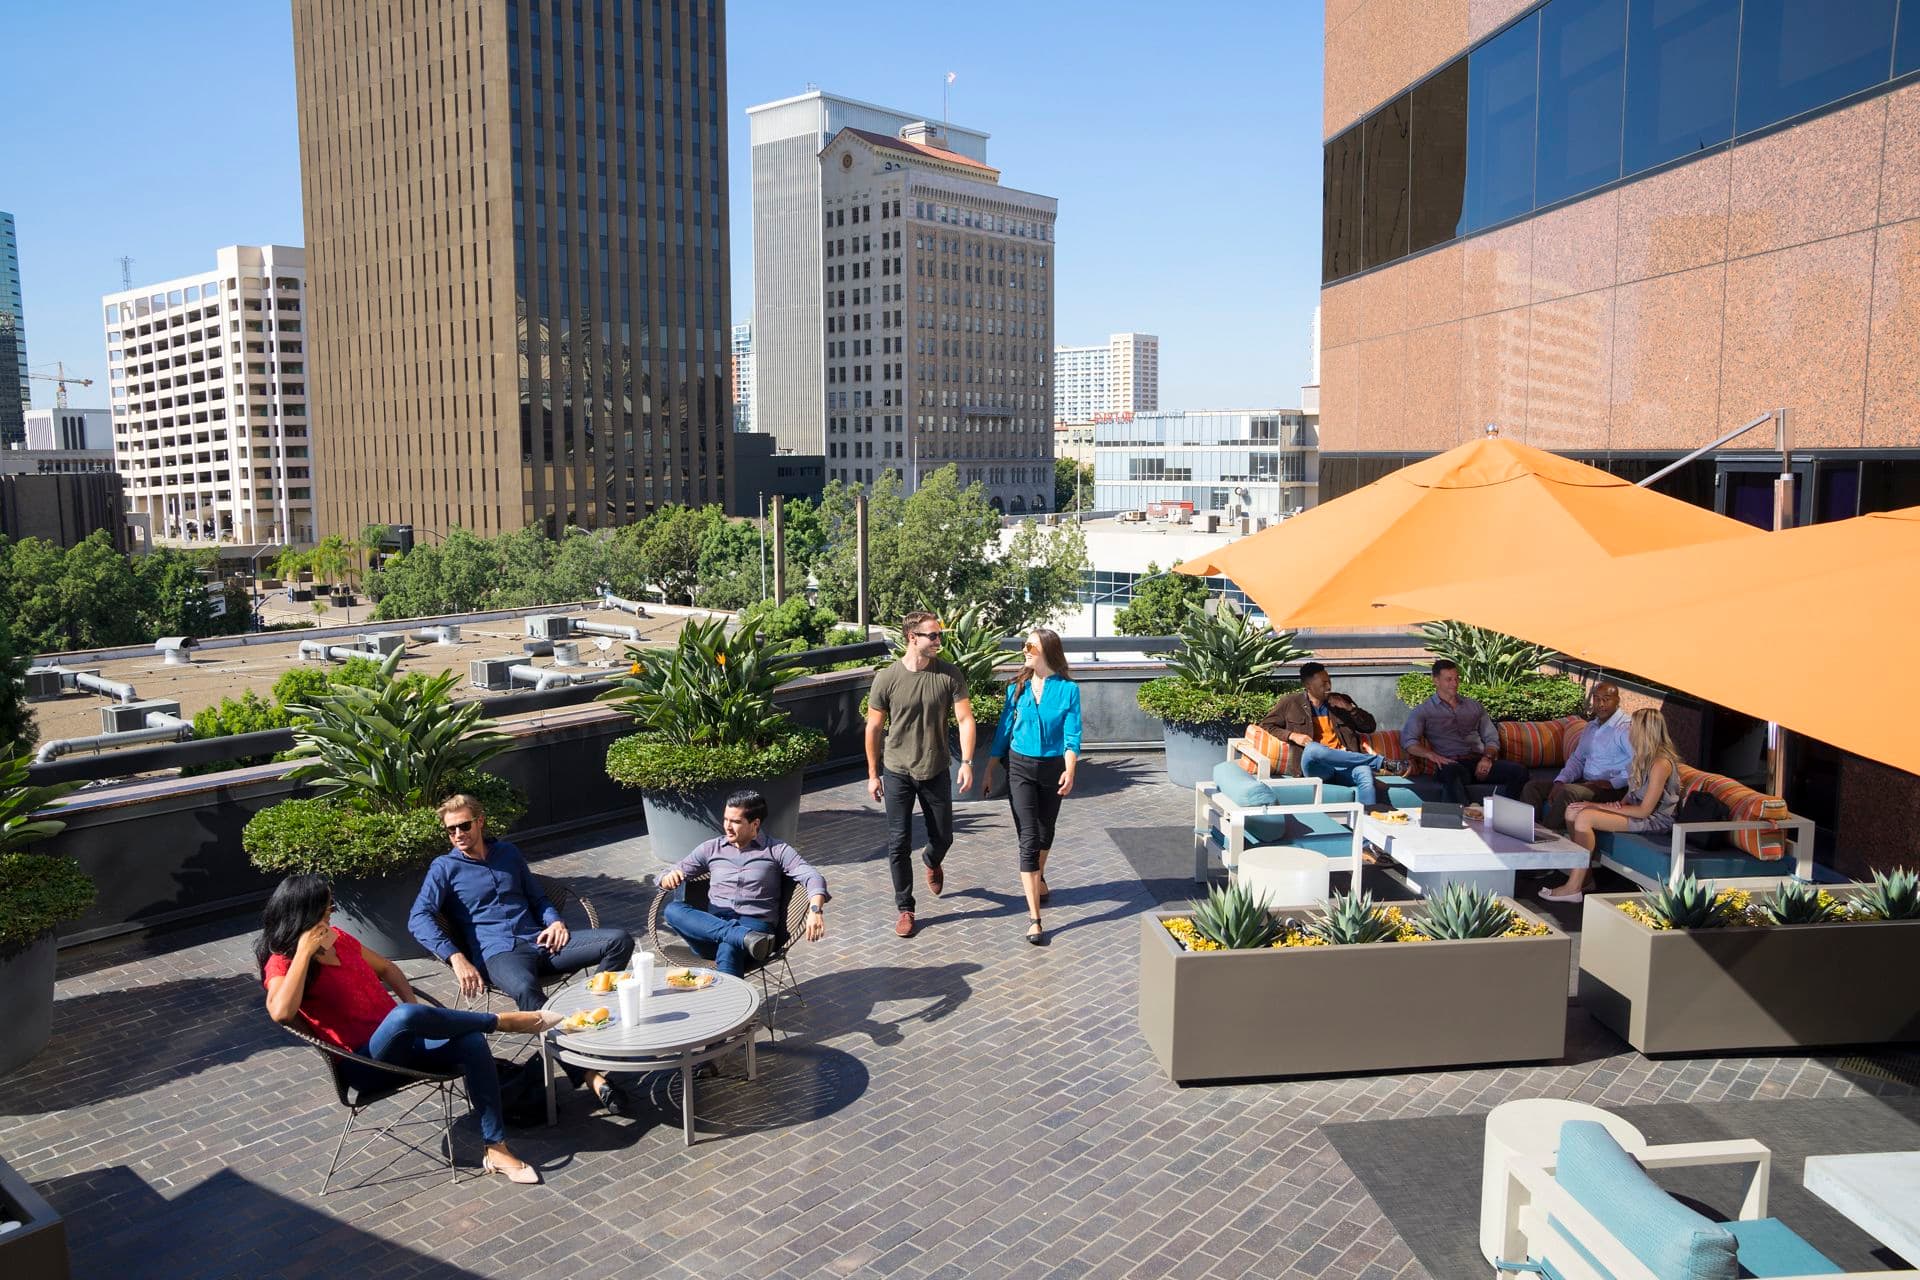 View of The Commons Outdoor Workspace at Wells Fargo Plaza in San Diego, CA.